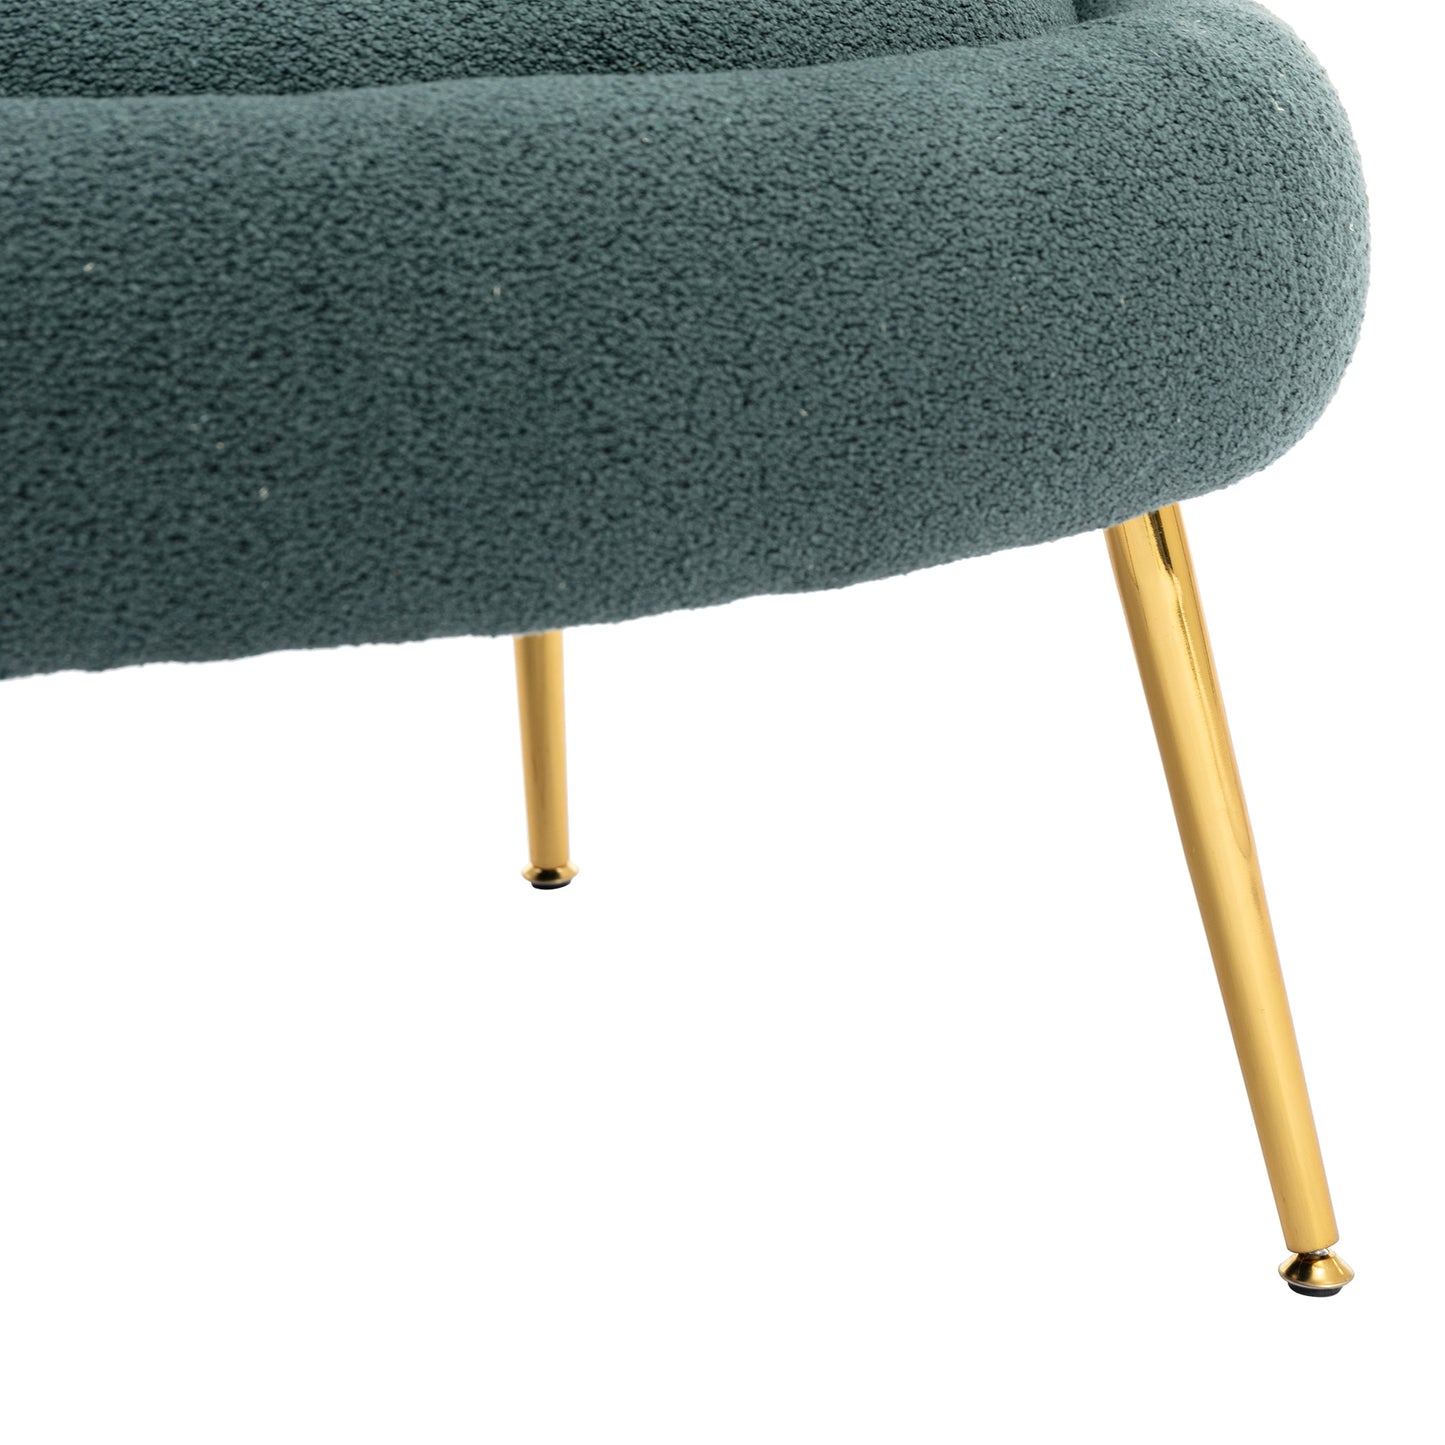 COOLMORE Accent  Chair  ,leisure sofa  with  Golden  feet